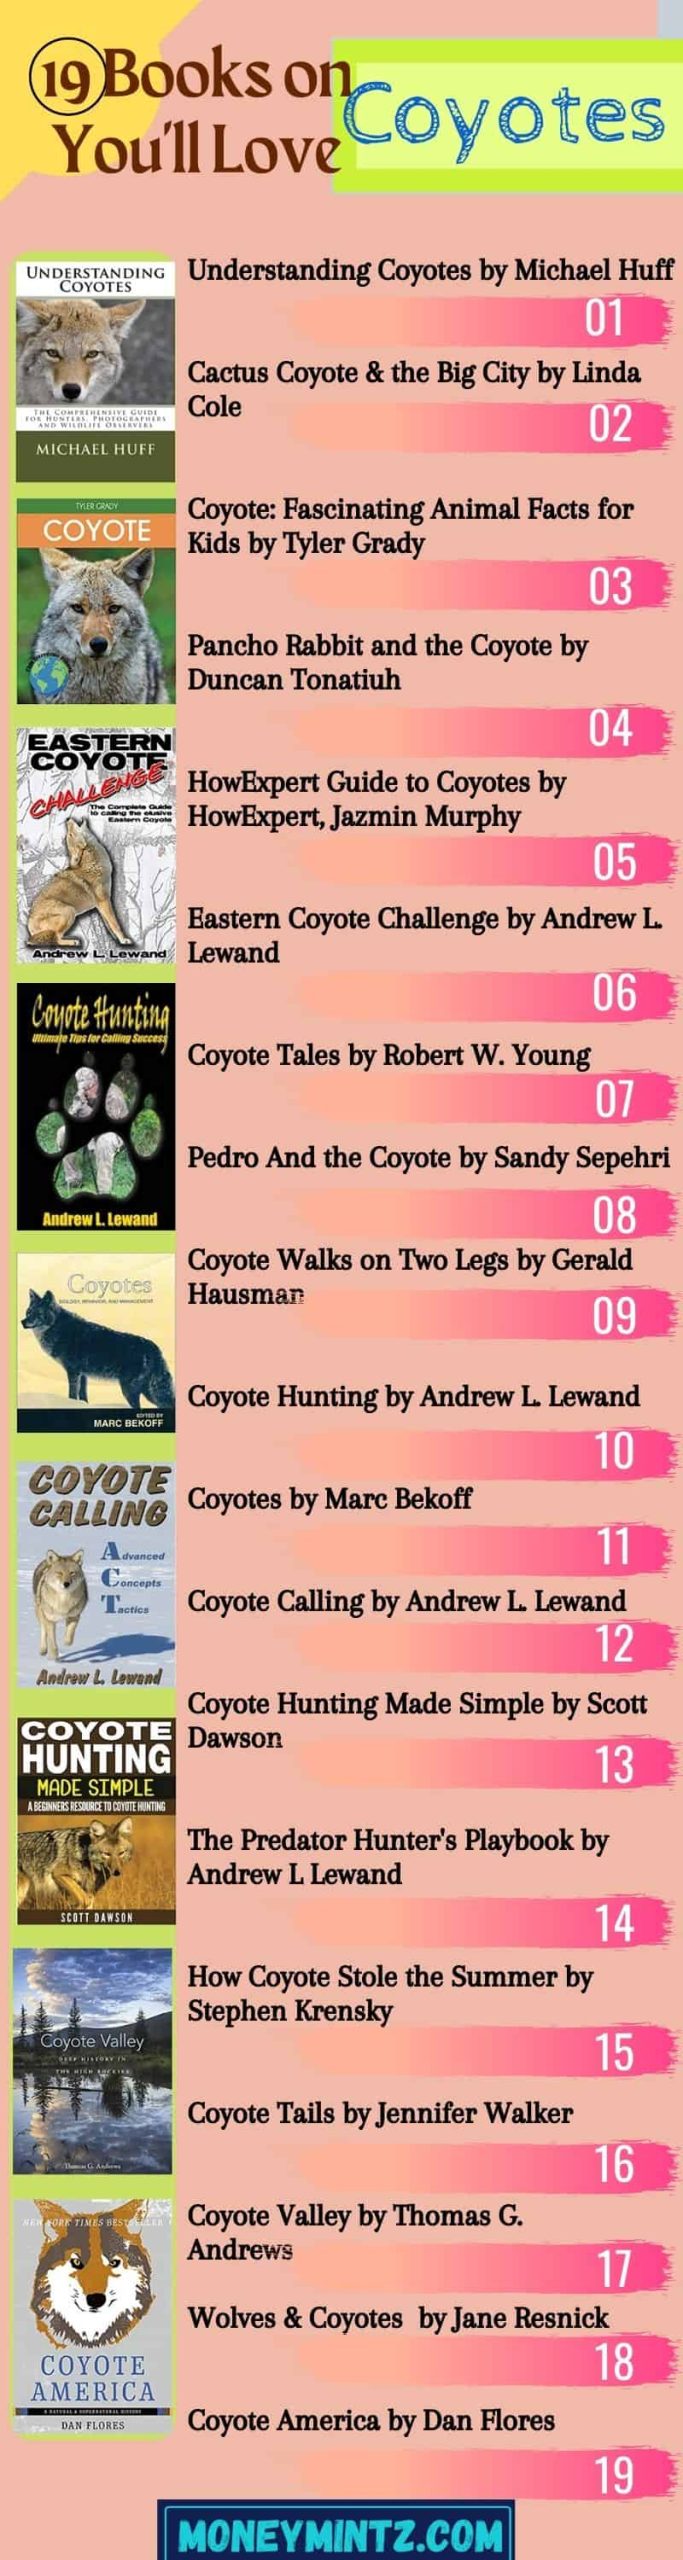 19 Best Books on Coyotes You'll Love to Read